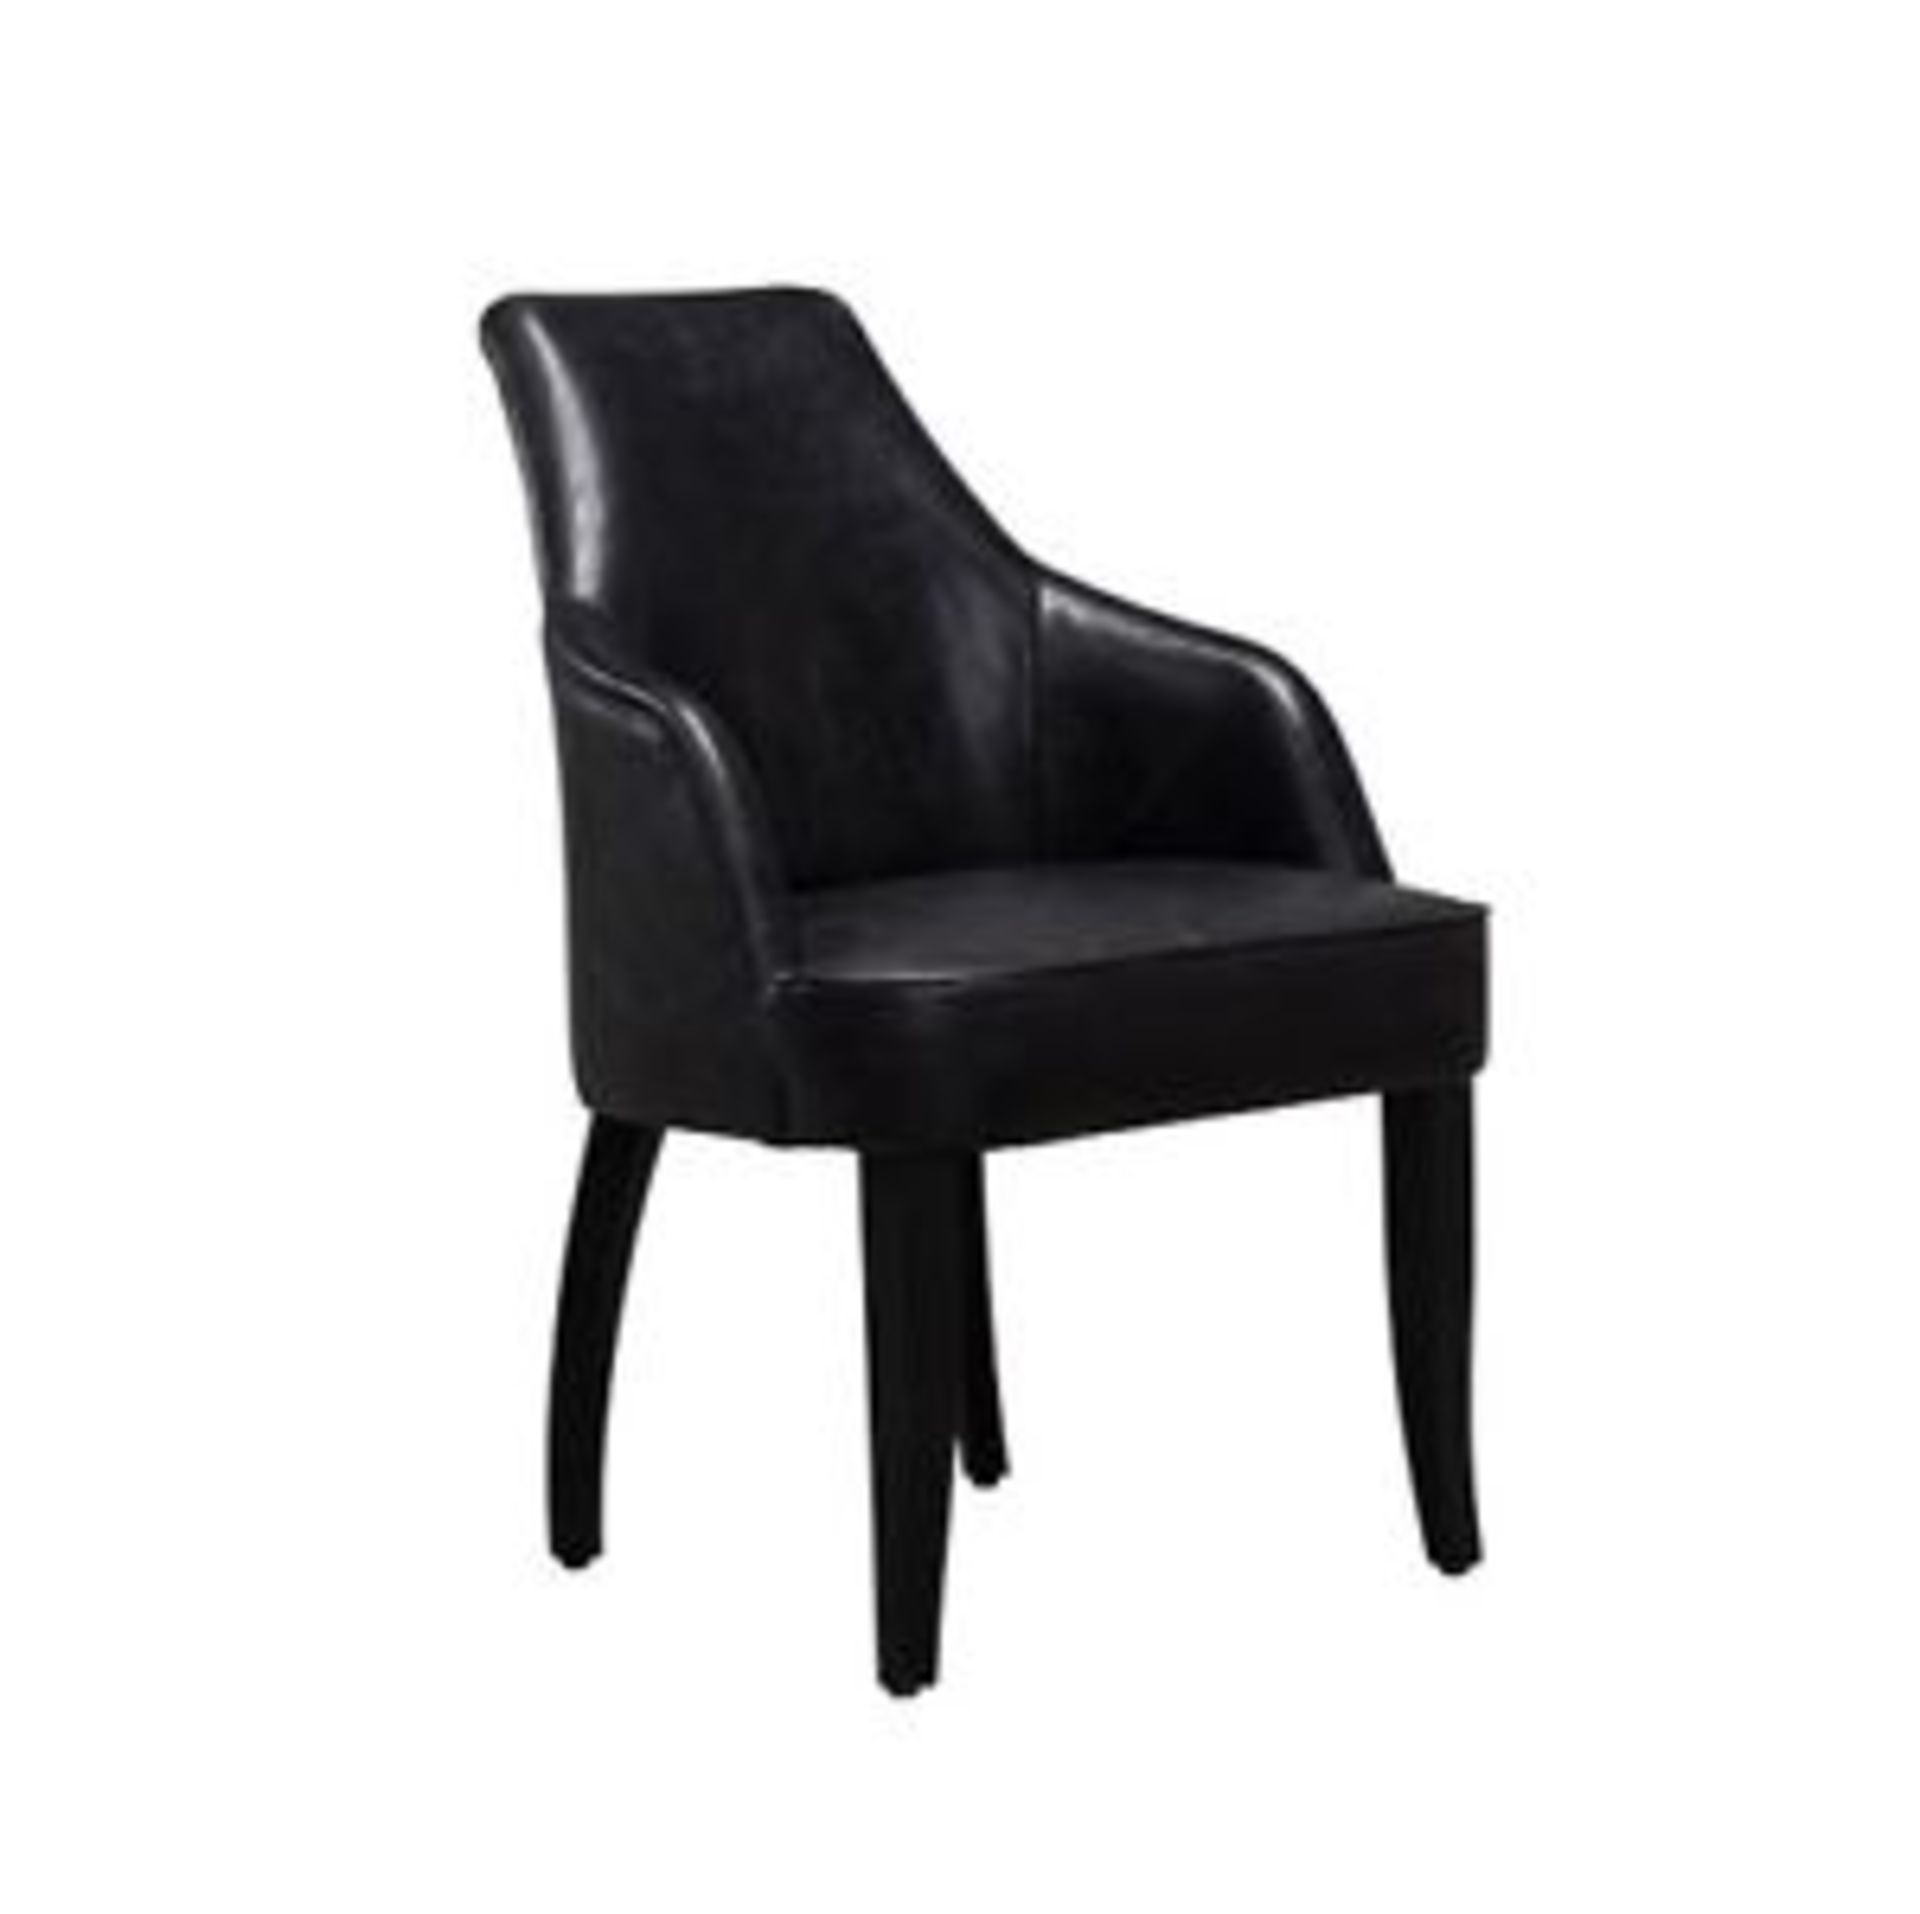 Sebastian Chair Ride Gun Leather A Classic Spponback Design. Perfect For Those Needing A Sensibly